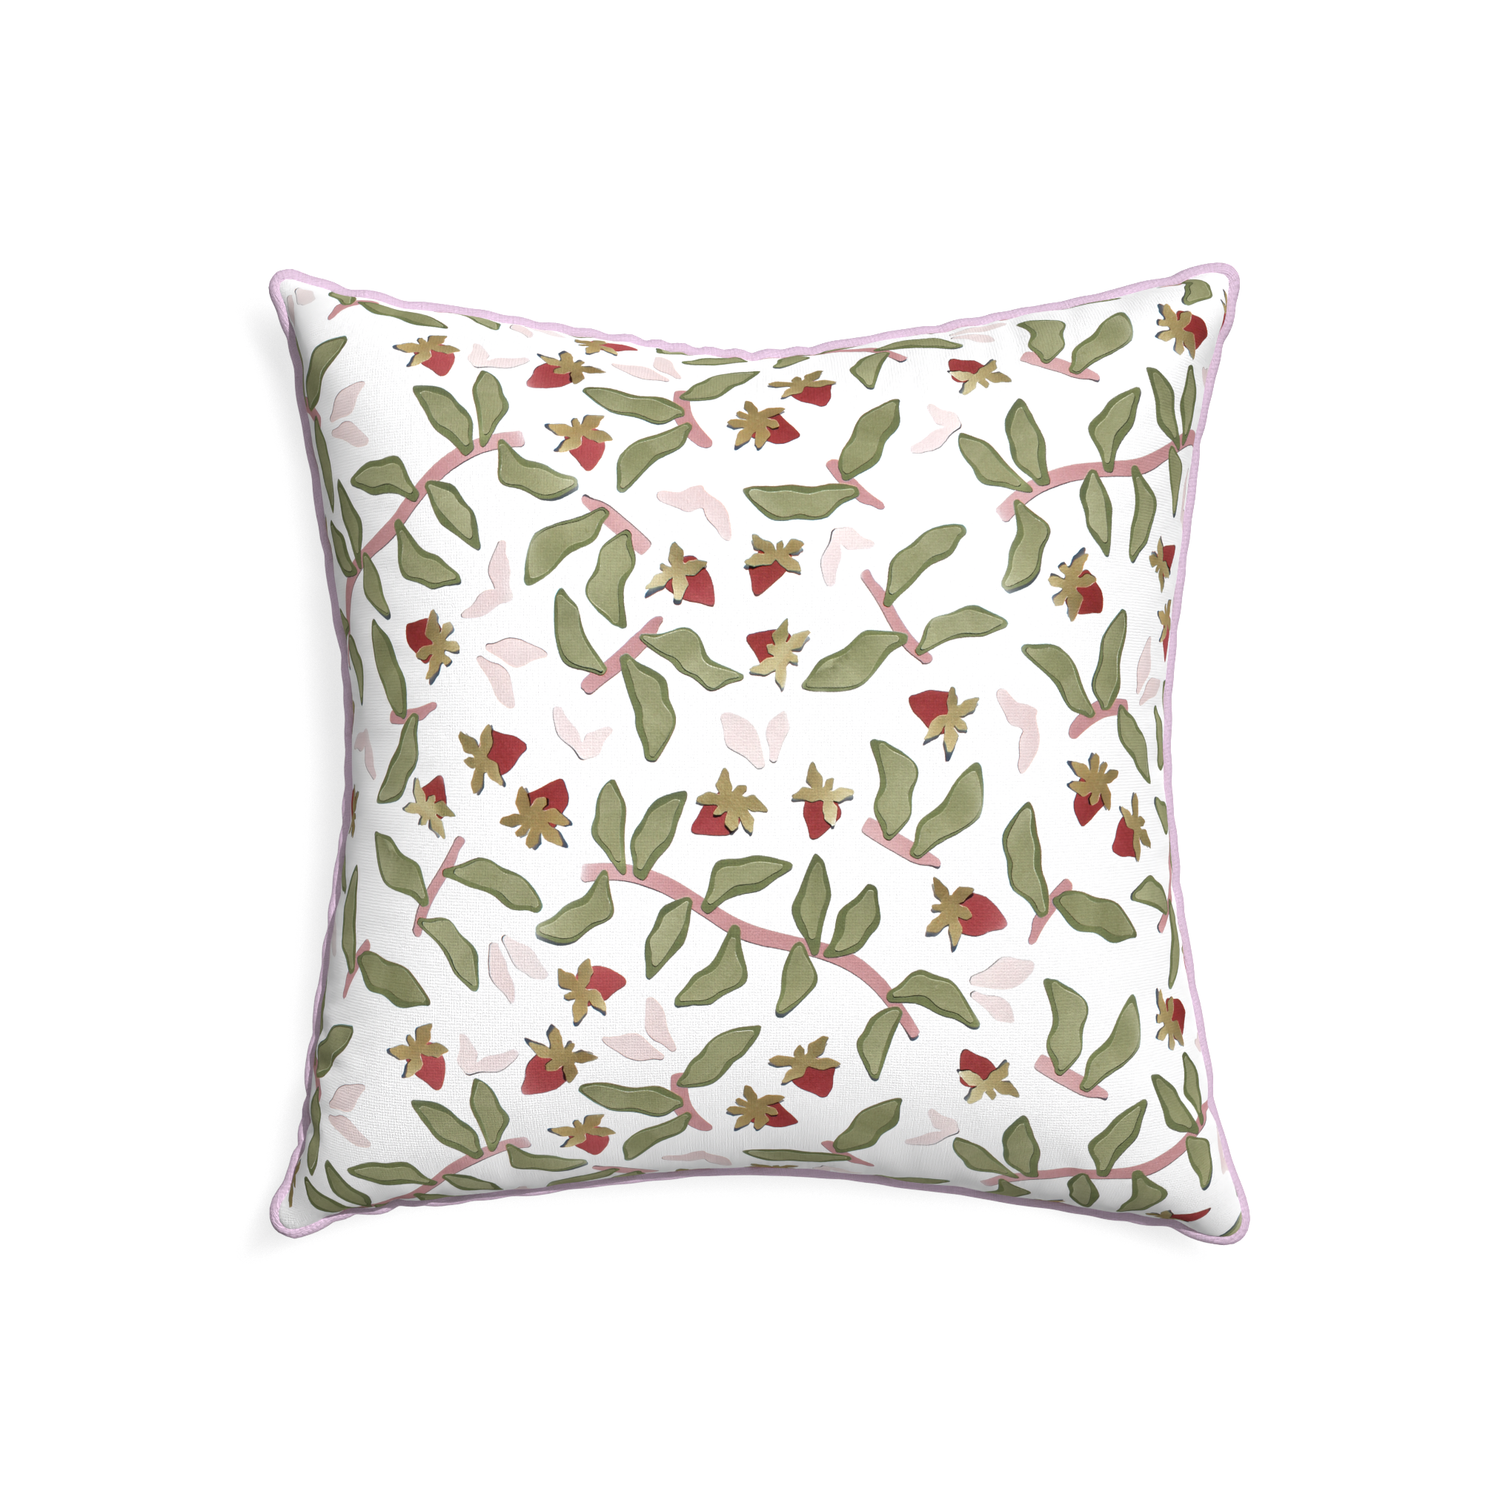 22-square nellie custom strawberry & botanicalpillow with l piping on white background